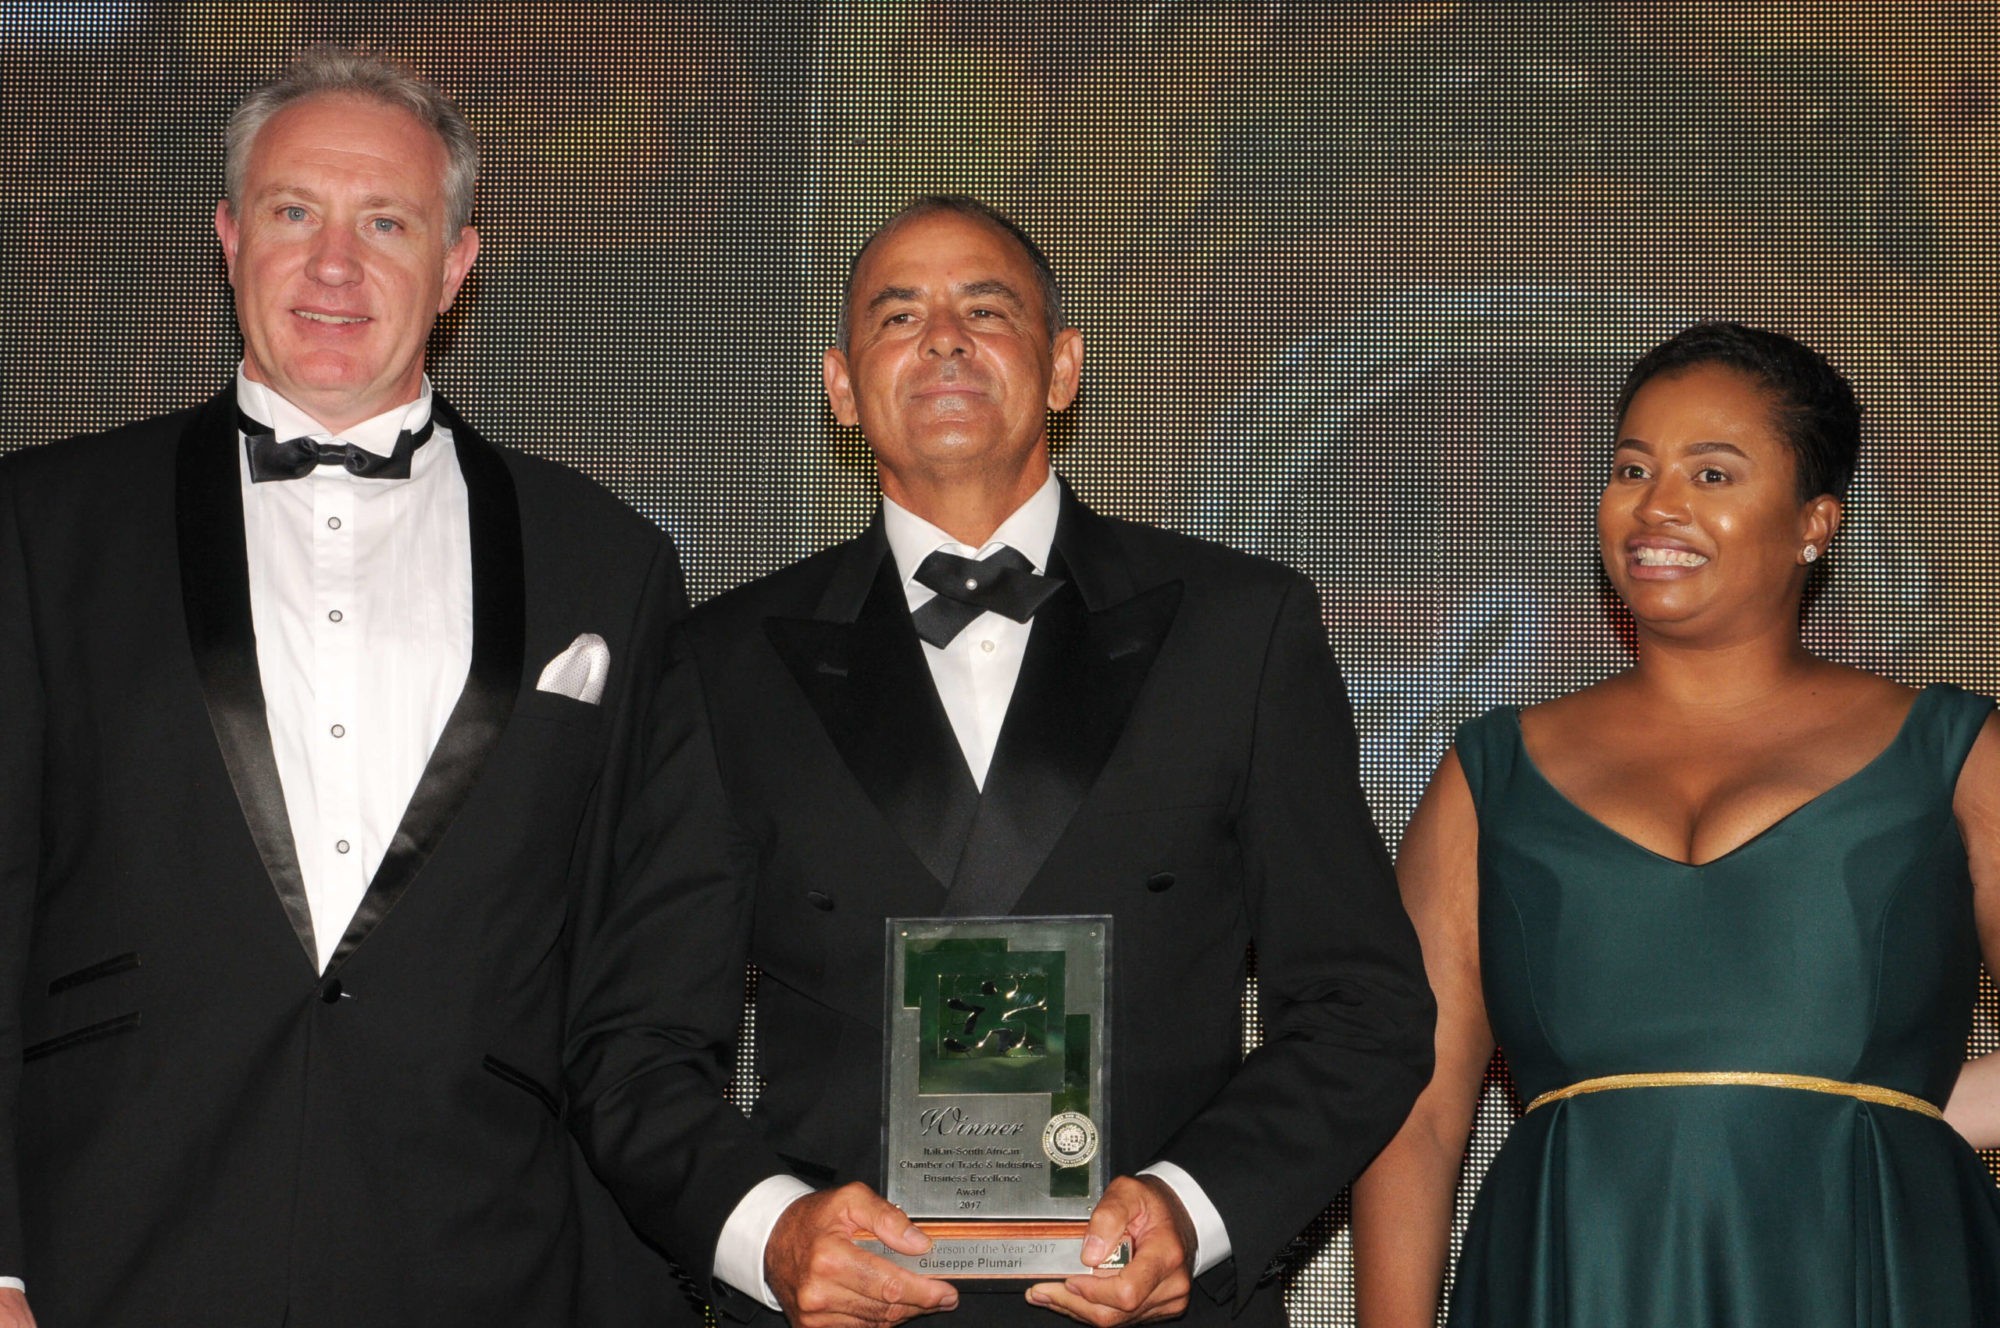 Steyn City Properties CEO named Business Person of the Year